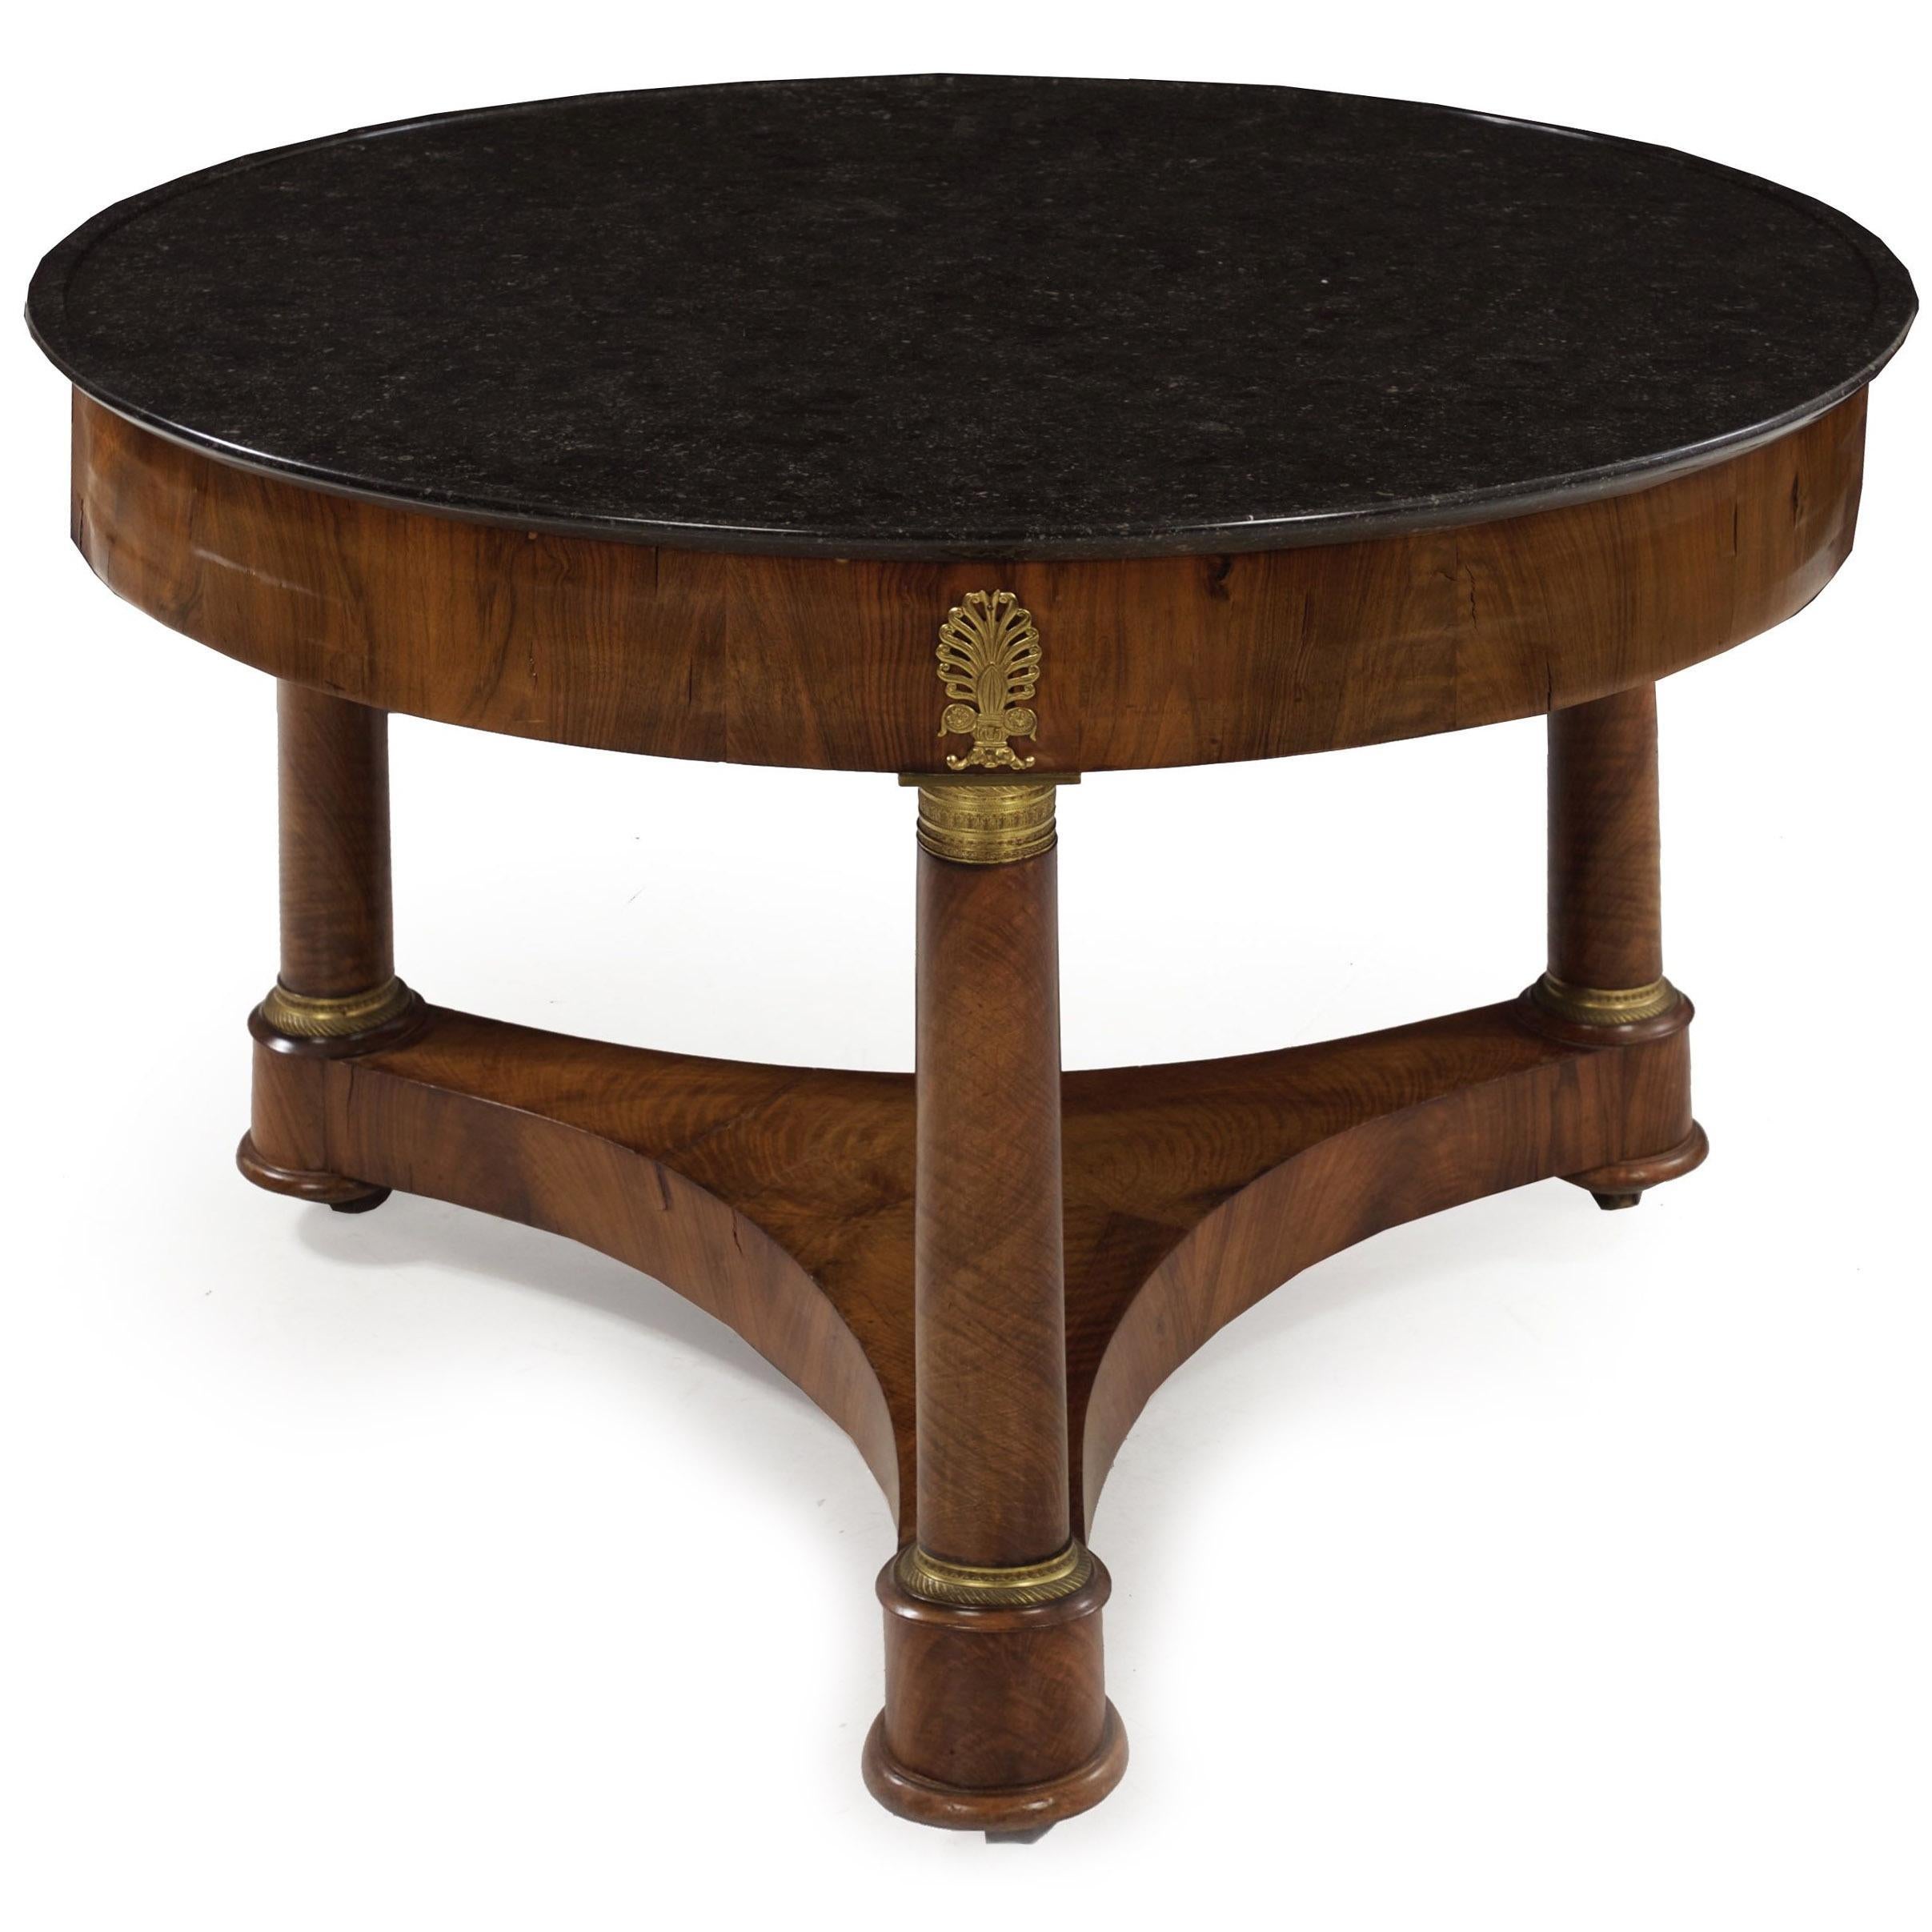 French Empire Antique Burl Walnut Center Table with Black Marble Top, circa 1815 In Good Condition For Sale In Shippensburg, PA